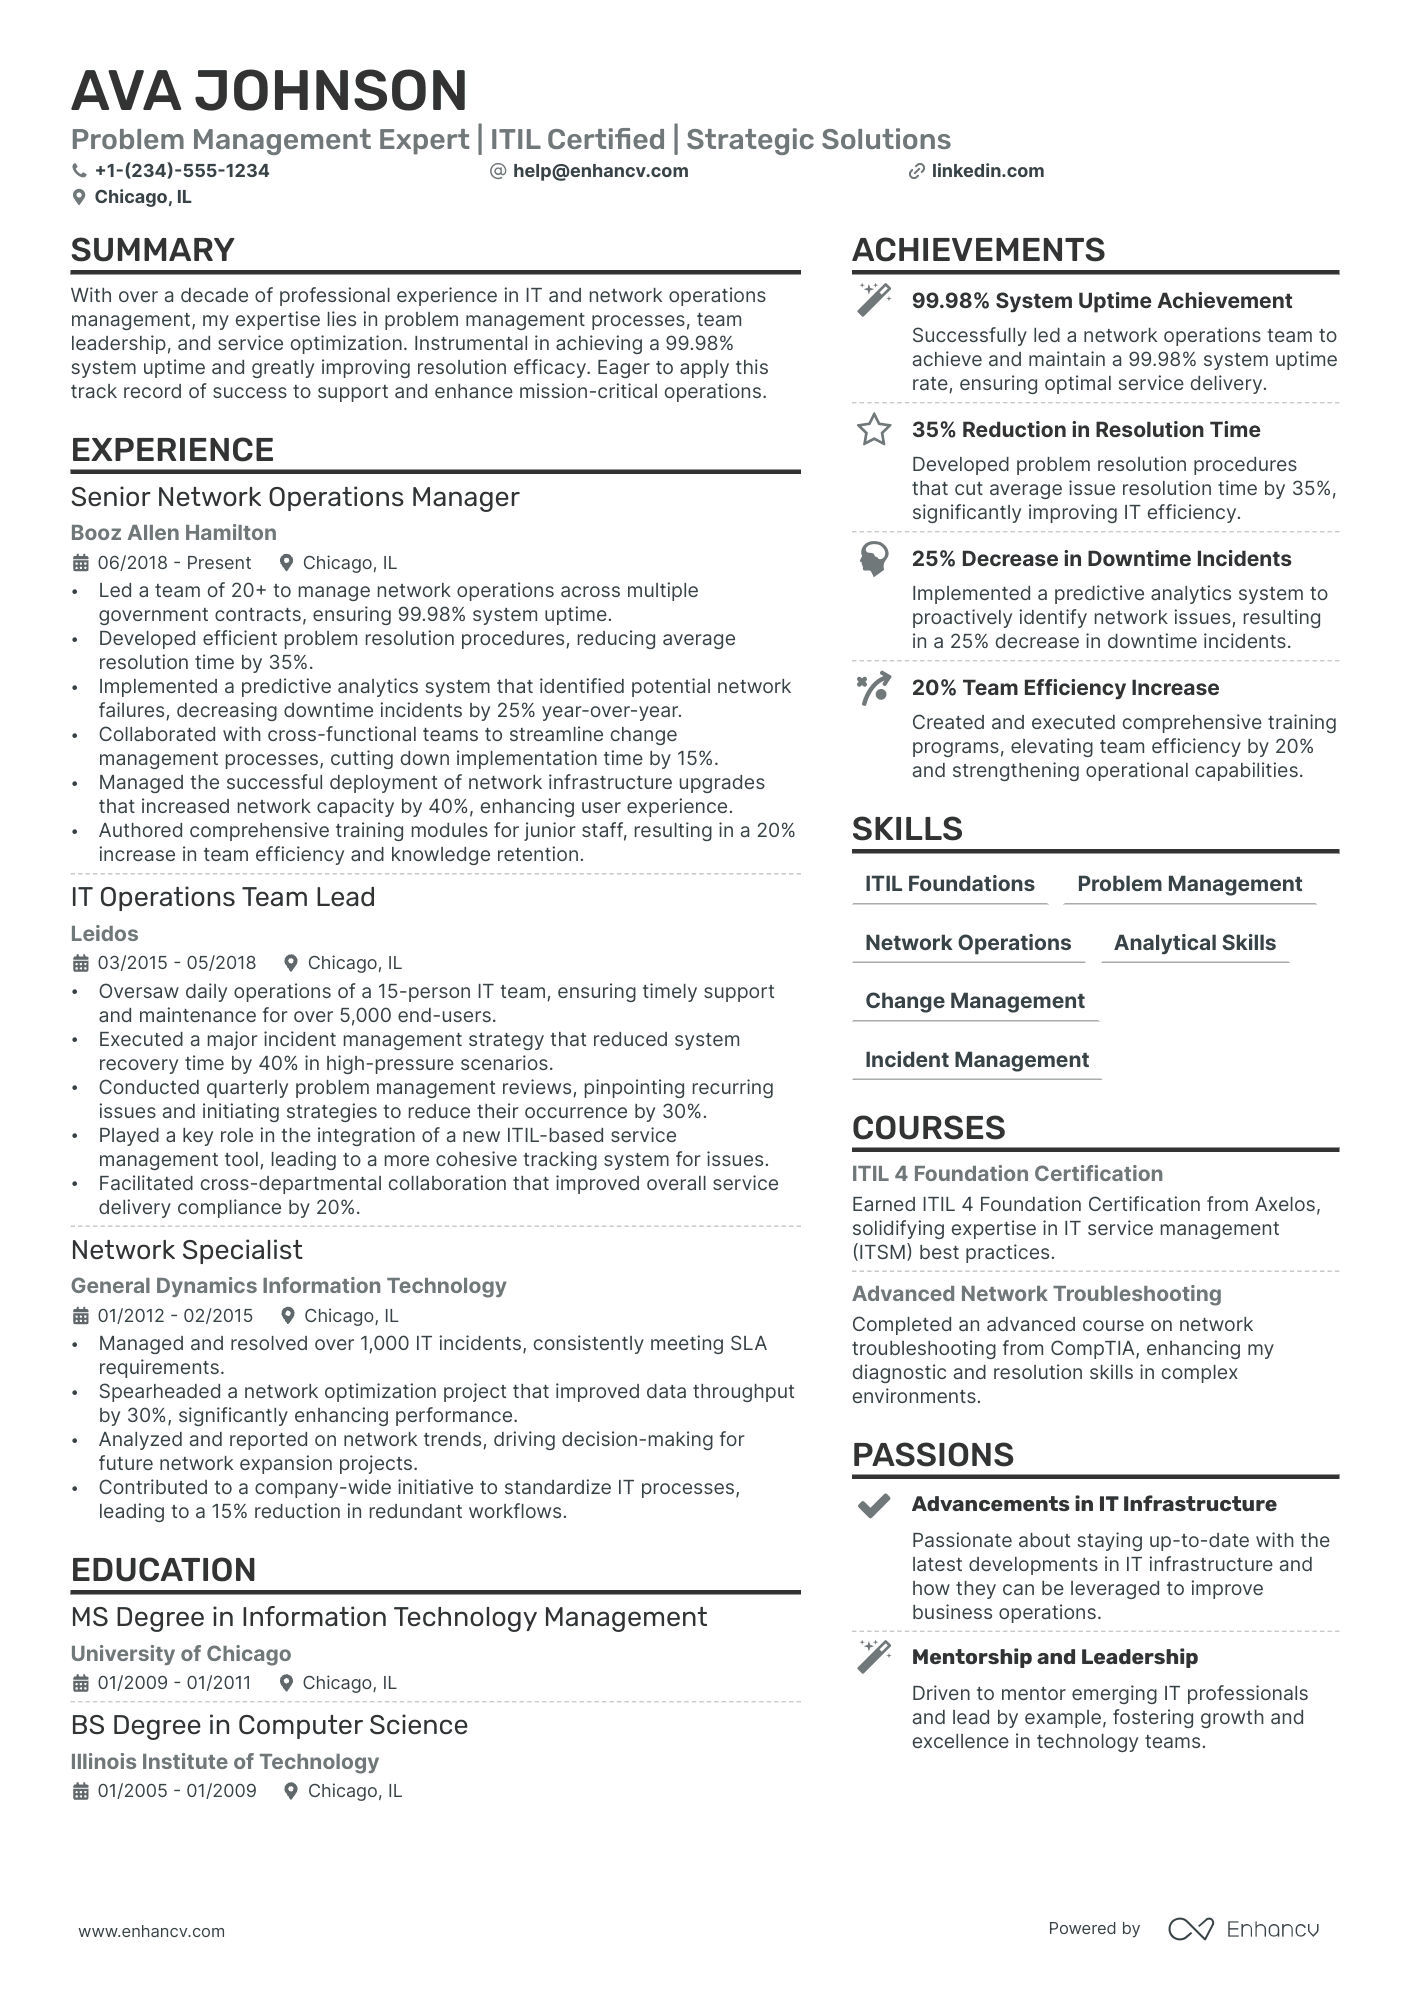 Problem Manager resume example